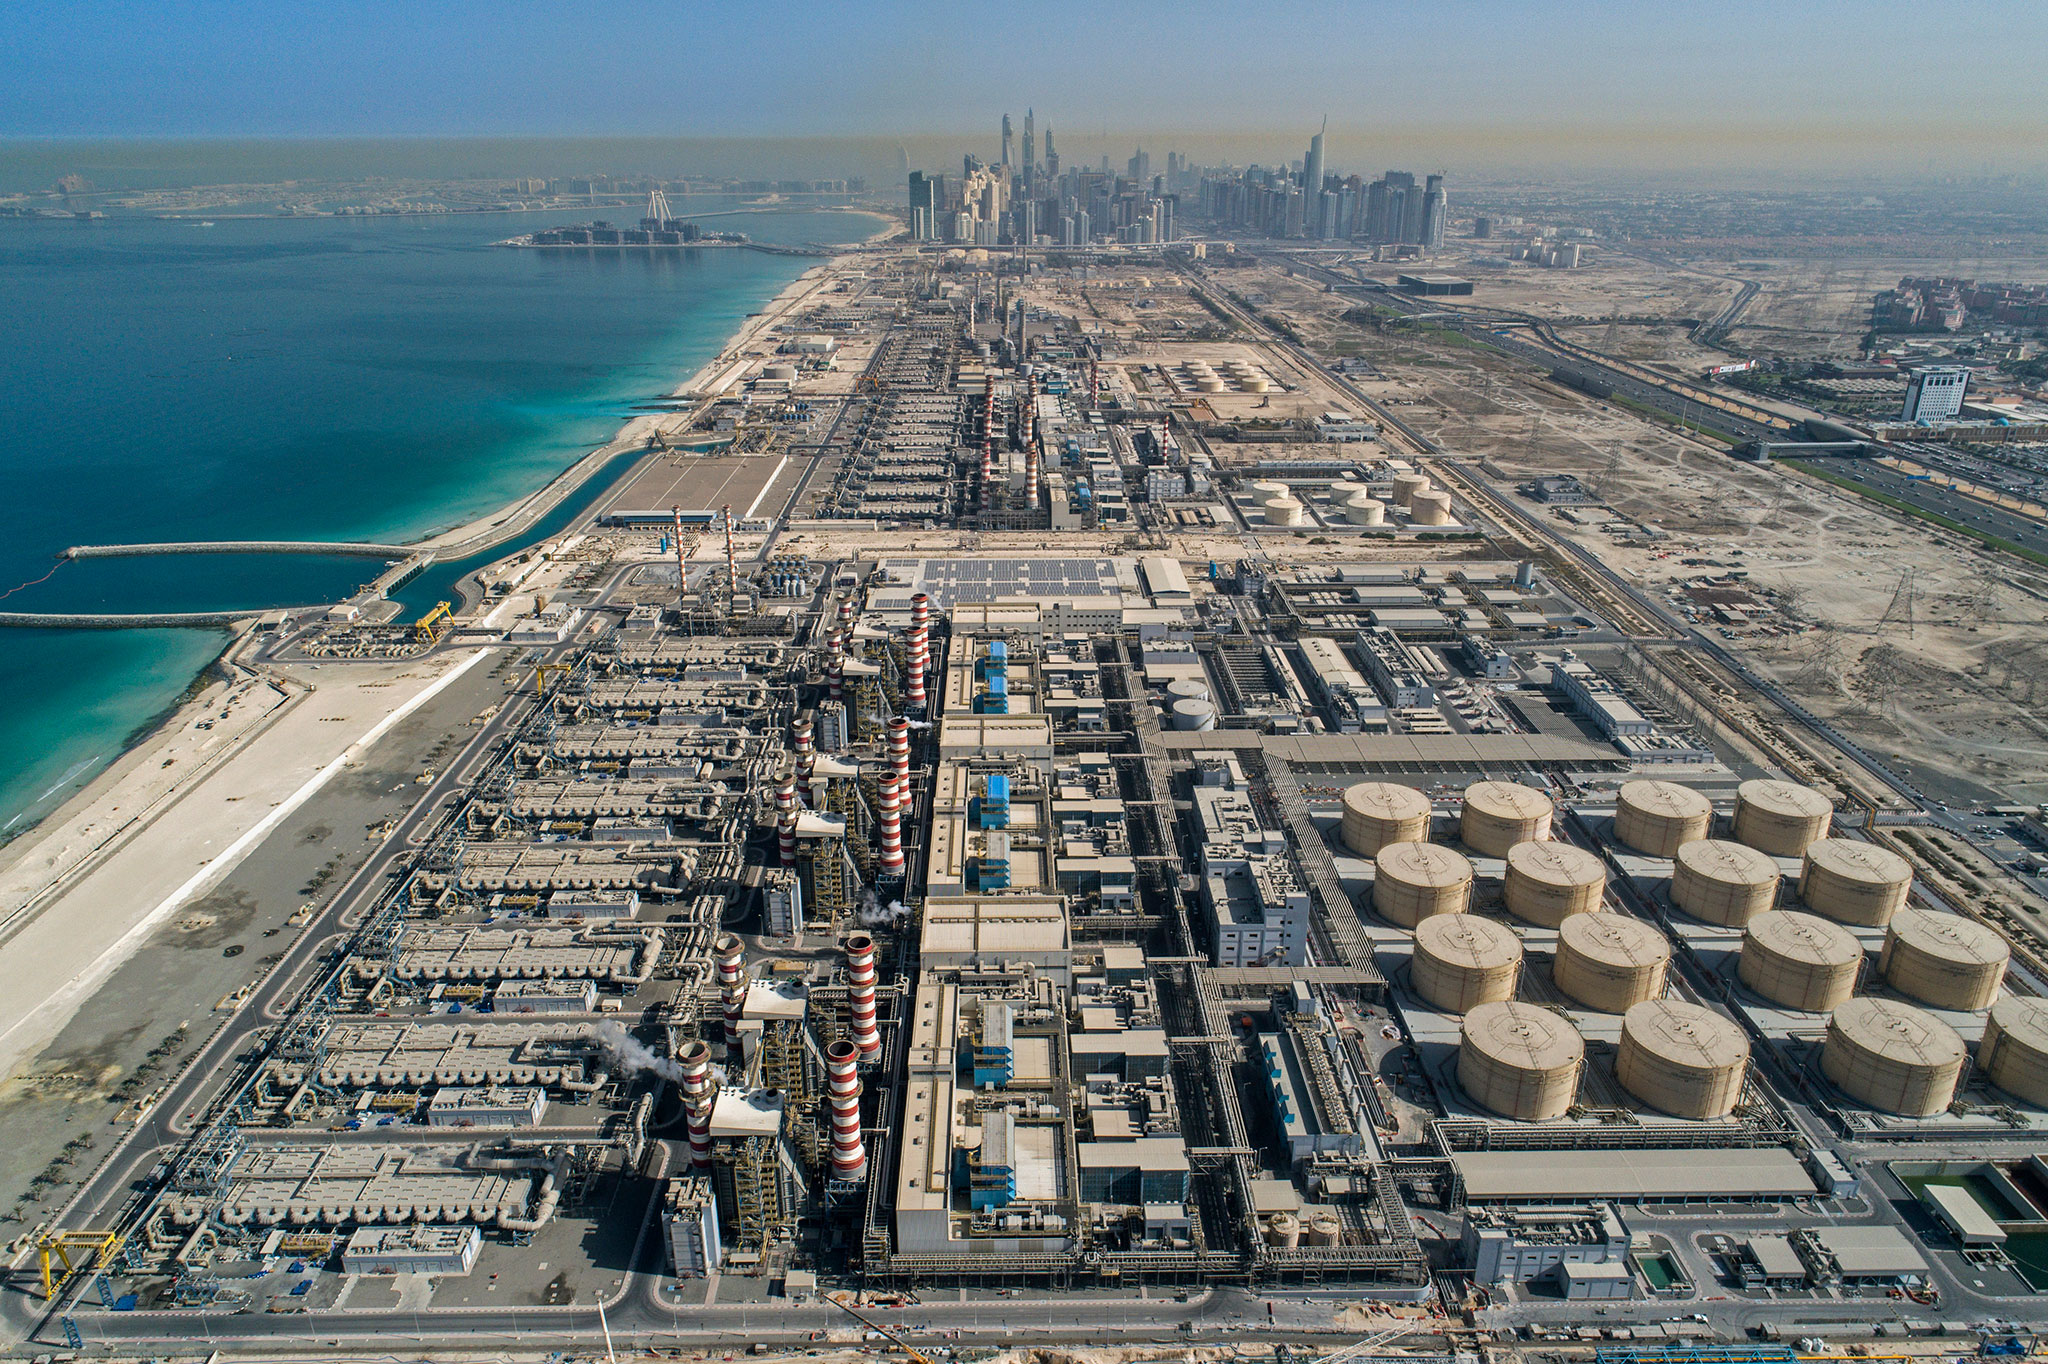 Egypt to construct 47 desalination plants in the next 5 years.